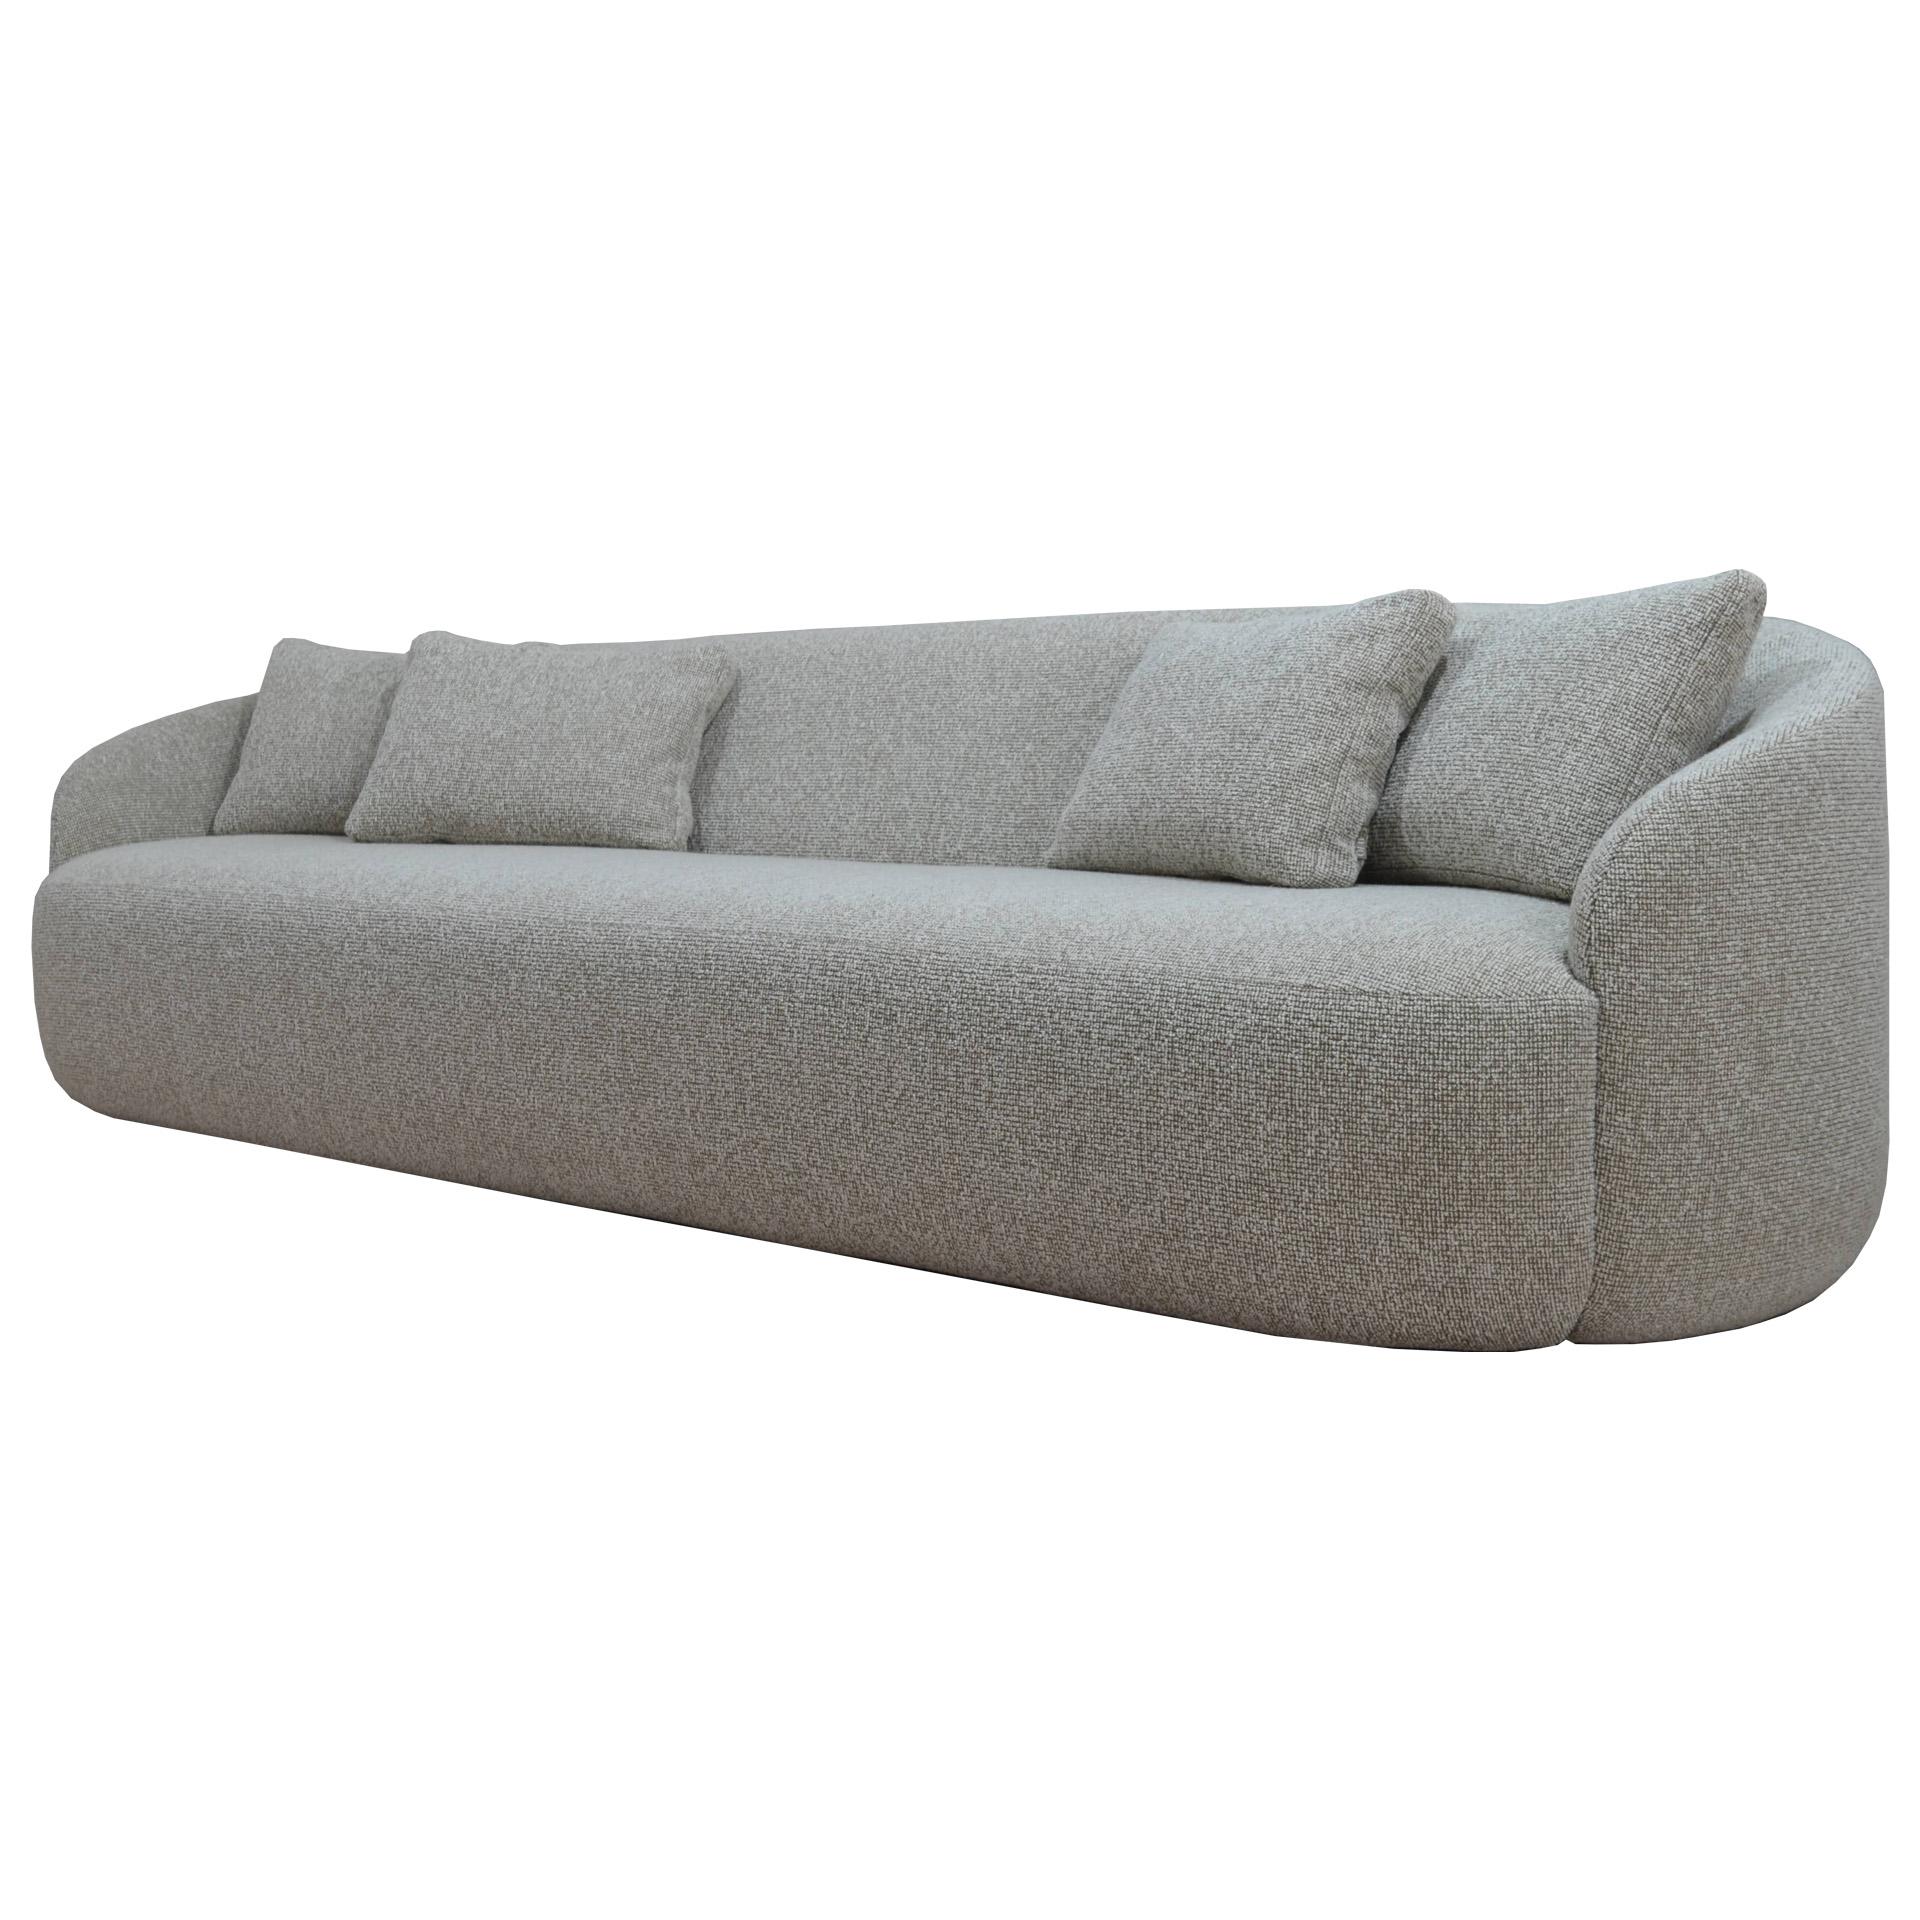 The rounded, curved shape, is crafted into the unique and original design of this well-proportioned and visually distinctive sofa series, available in custom sizes, ensuring intimacy and convivial socialization in any interior. Upholstery in your